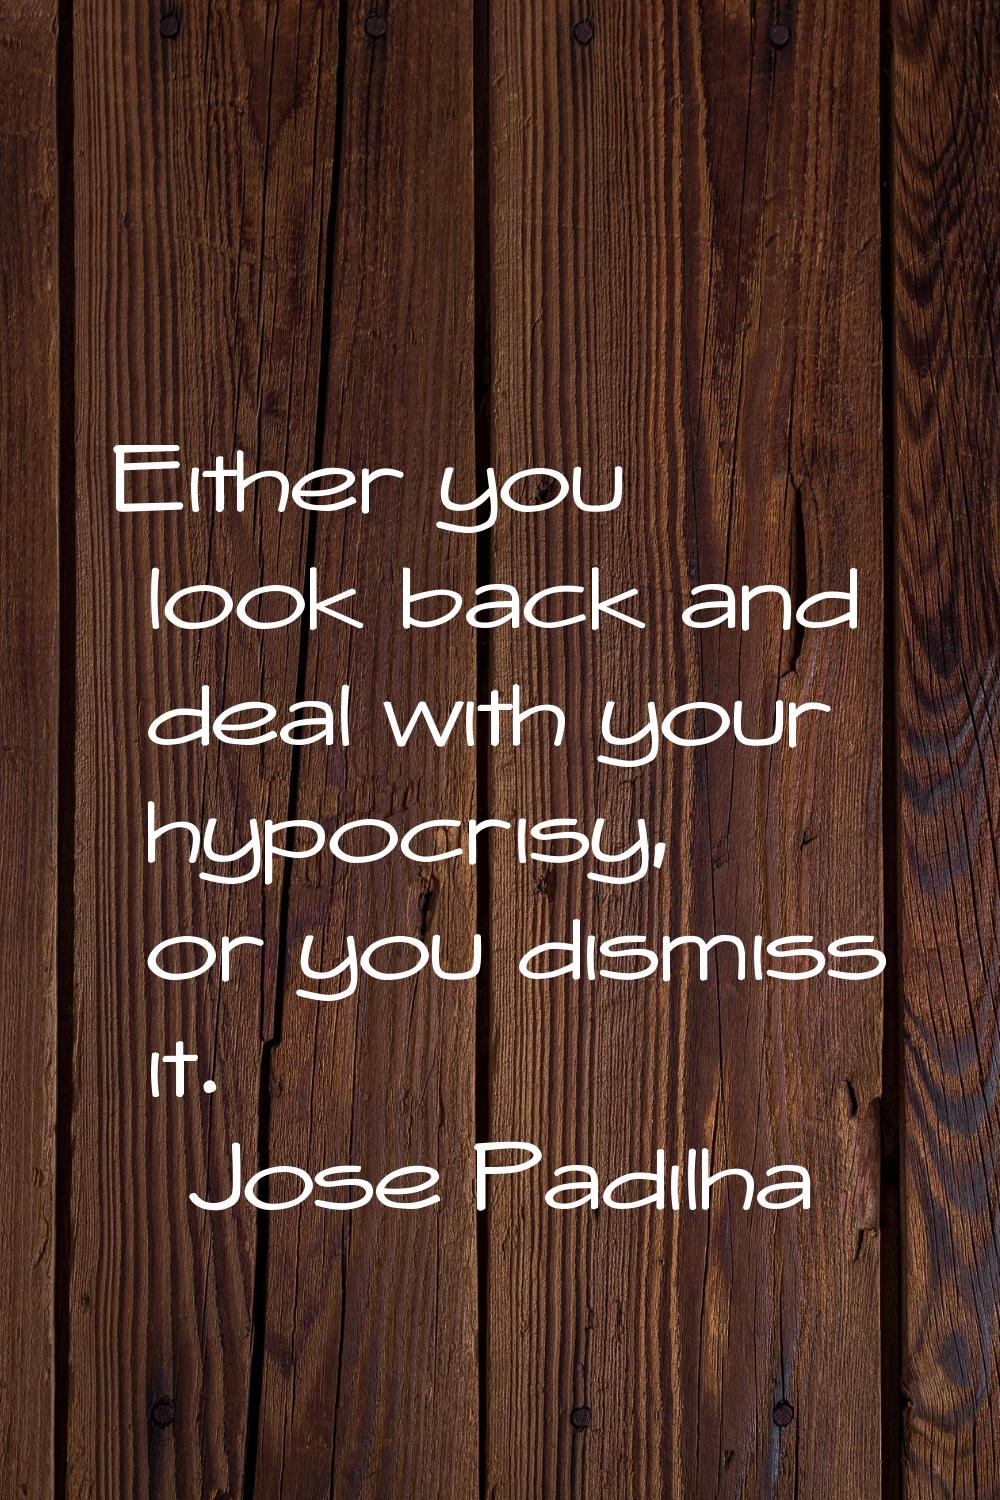 Either you look back and deal with your hypocrisy, or you dismiss it.